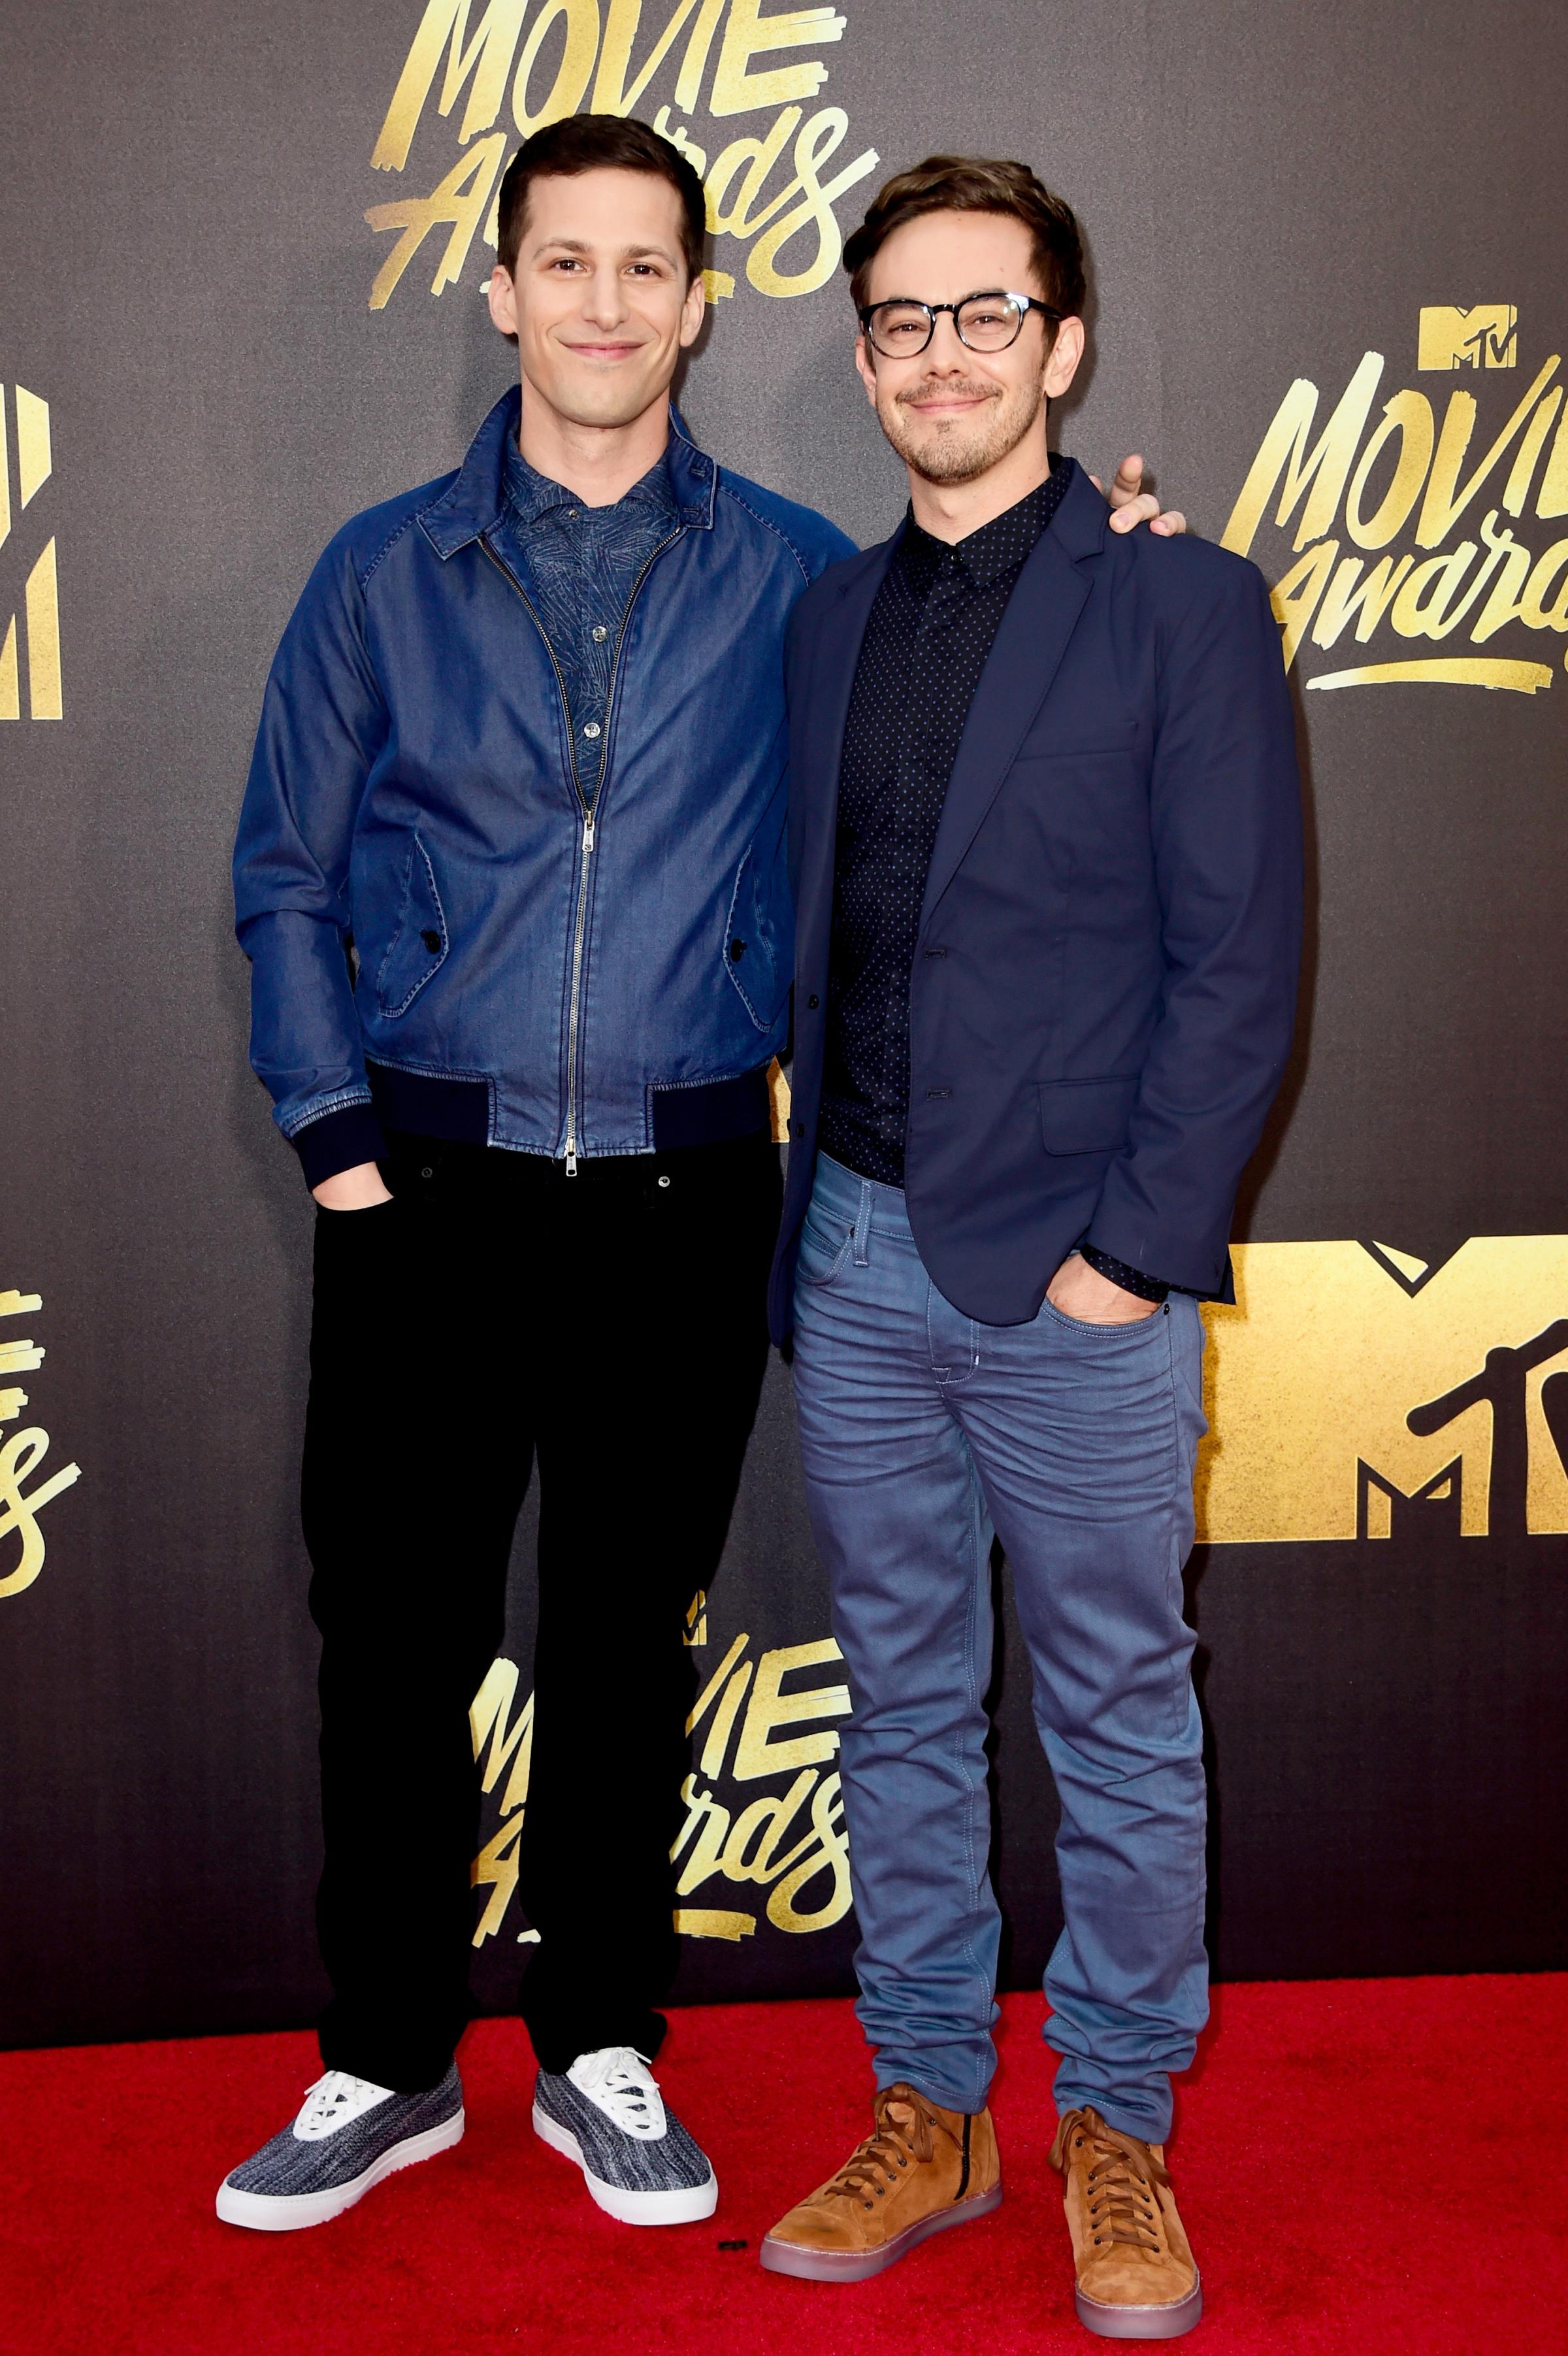 Andy Samberg and Jorma Taccone of The Lonely Island attend the 2016 MTV Movie Awards at Warner Bros. Studios on April 9, 2016 in Burbank, Calif.